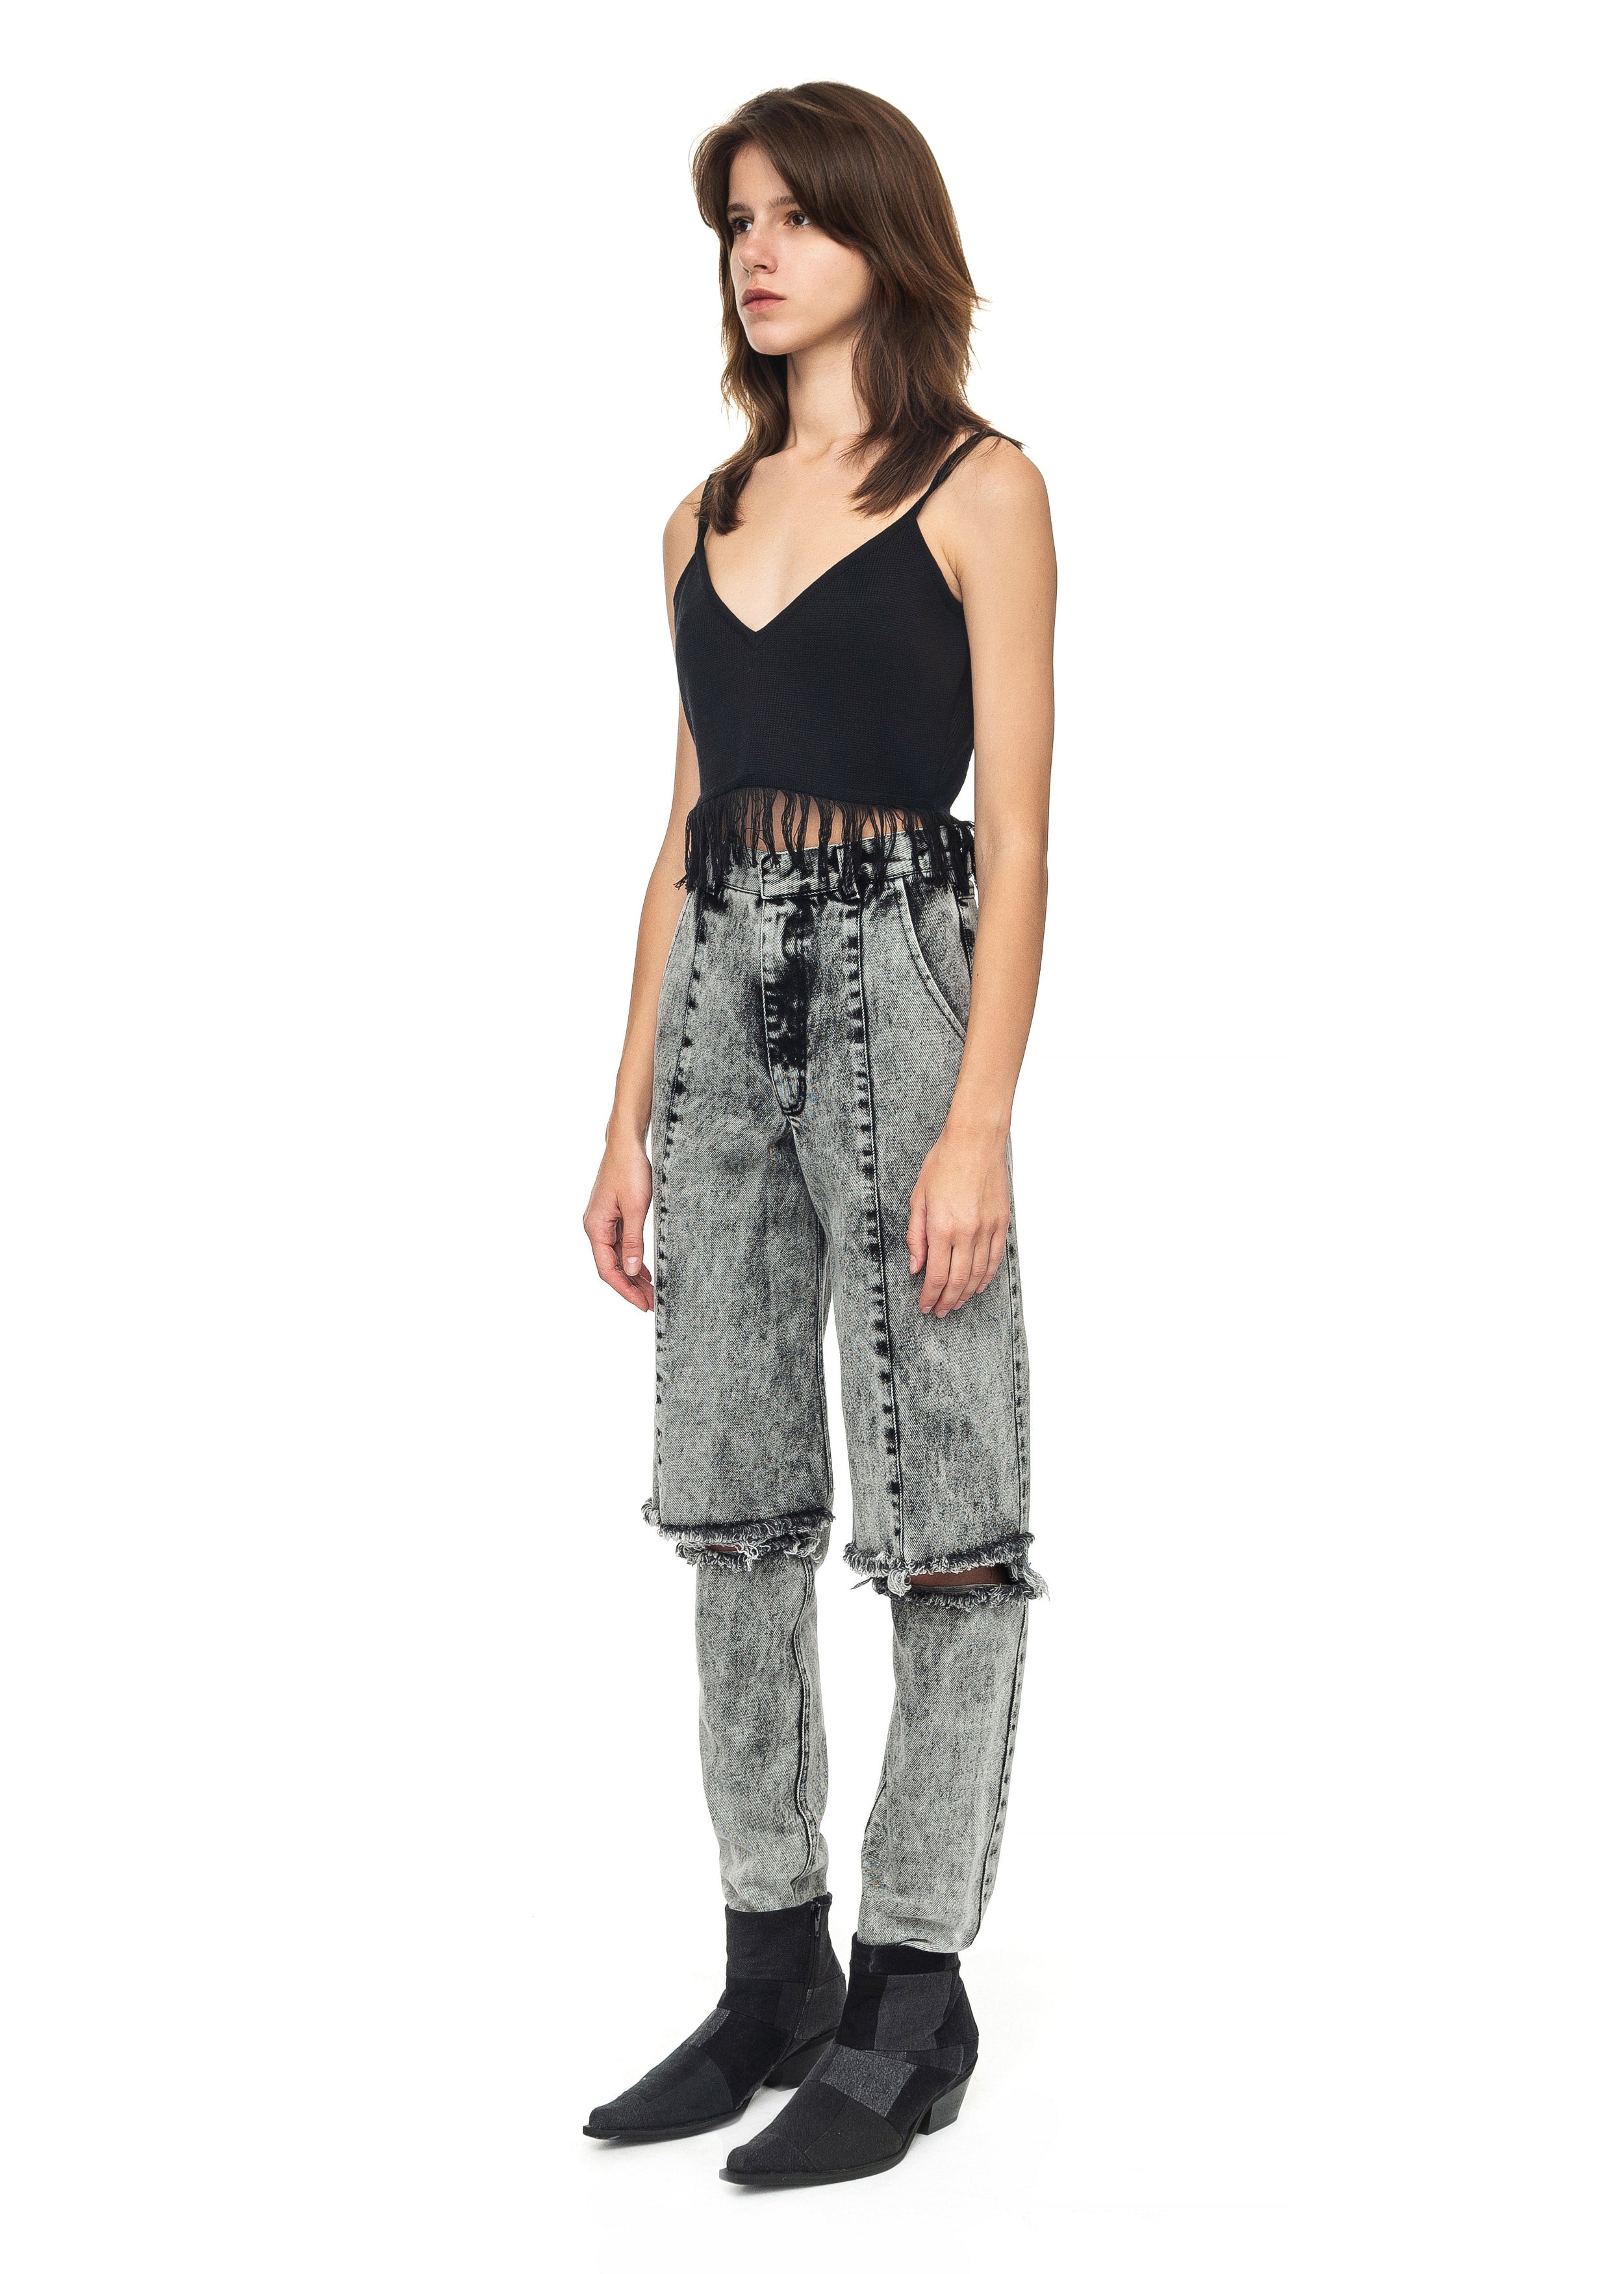 Knit Crop Top with Fringe image